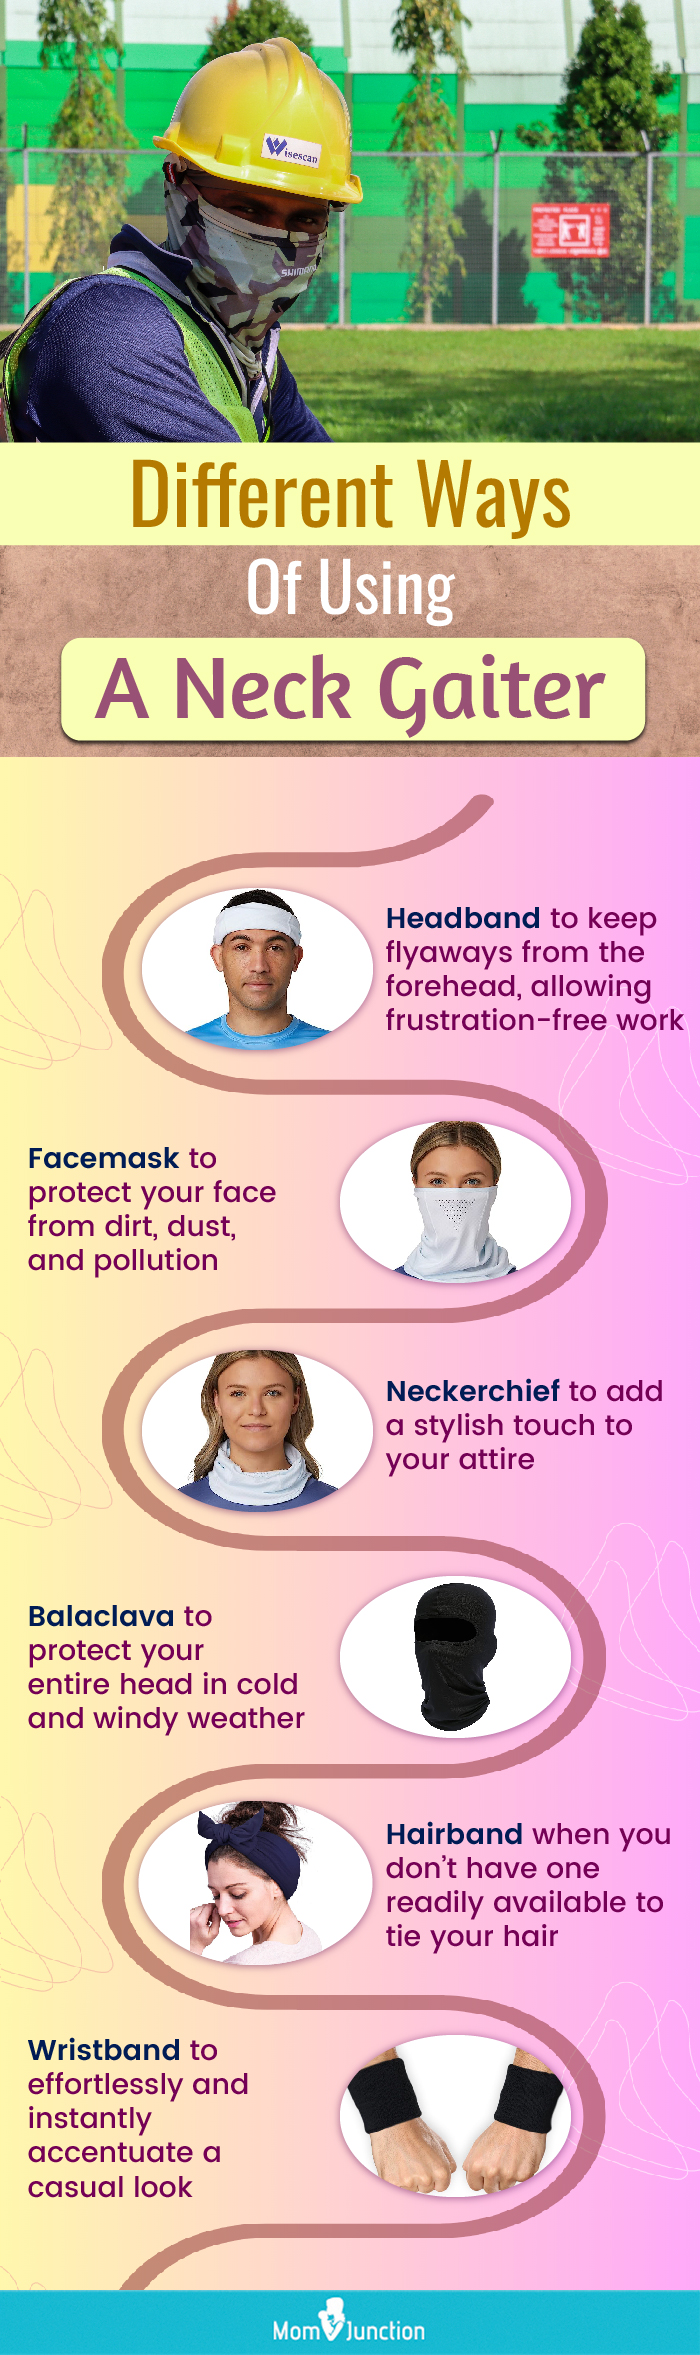 Different Ways Of Using A Neck Gaiter (infographic)